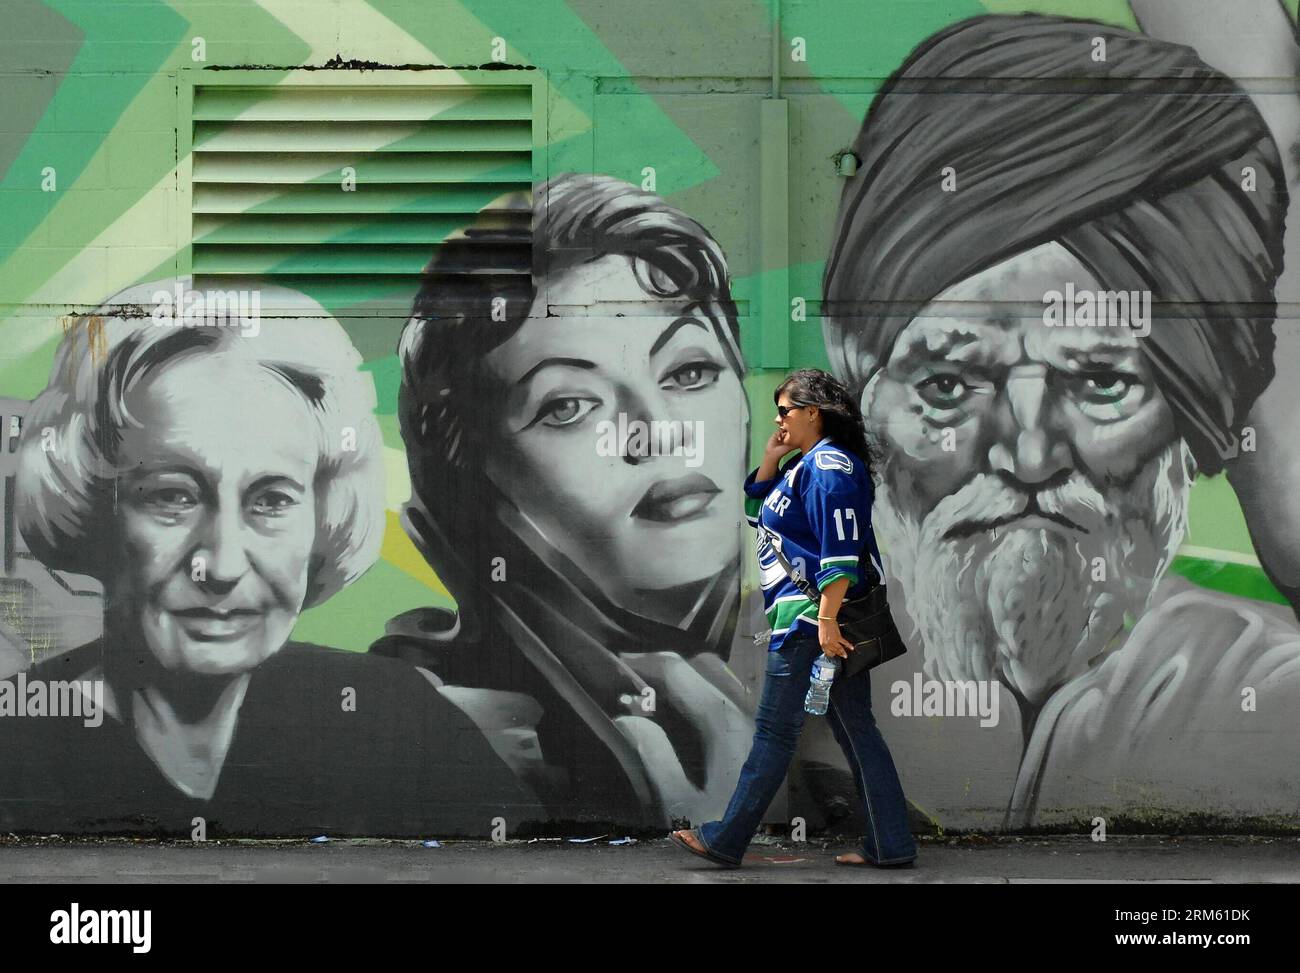 Bildnummer: 60761576  Datum: 26.11.2013  Copyright: imago/Xinhua     VANCOUVER, Nov. 26, 2013 - A woman walks past a wall with graffiti art in Vancouver, Canada, Nov. 26, 2013. For the second year in a row, Seattle-based walk ability ranking company Walk Score named Vancouver as the most walkable city in Canada. (Xinhua/Sergei Bachlakov) (zhf) CANADA-VANCOUVER-WALKABLE CITY PUBLICATIONxNOTxINxCHN Gesellschaft x2x xkg 2013 quer o0 Kunst Kultur Wandmalerei Land Leute Vancouver Canucks Trikot Stock Photo